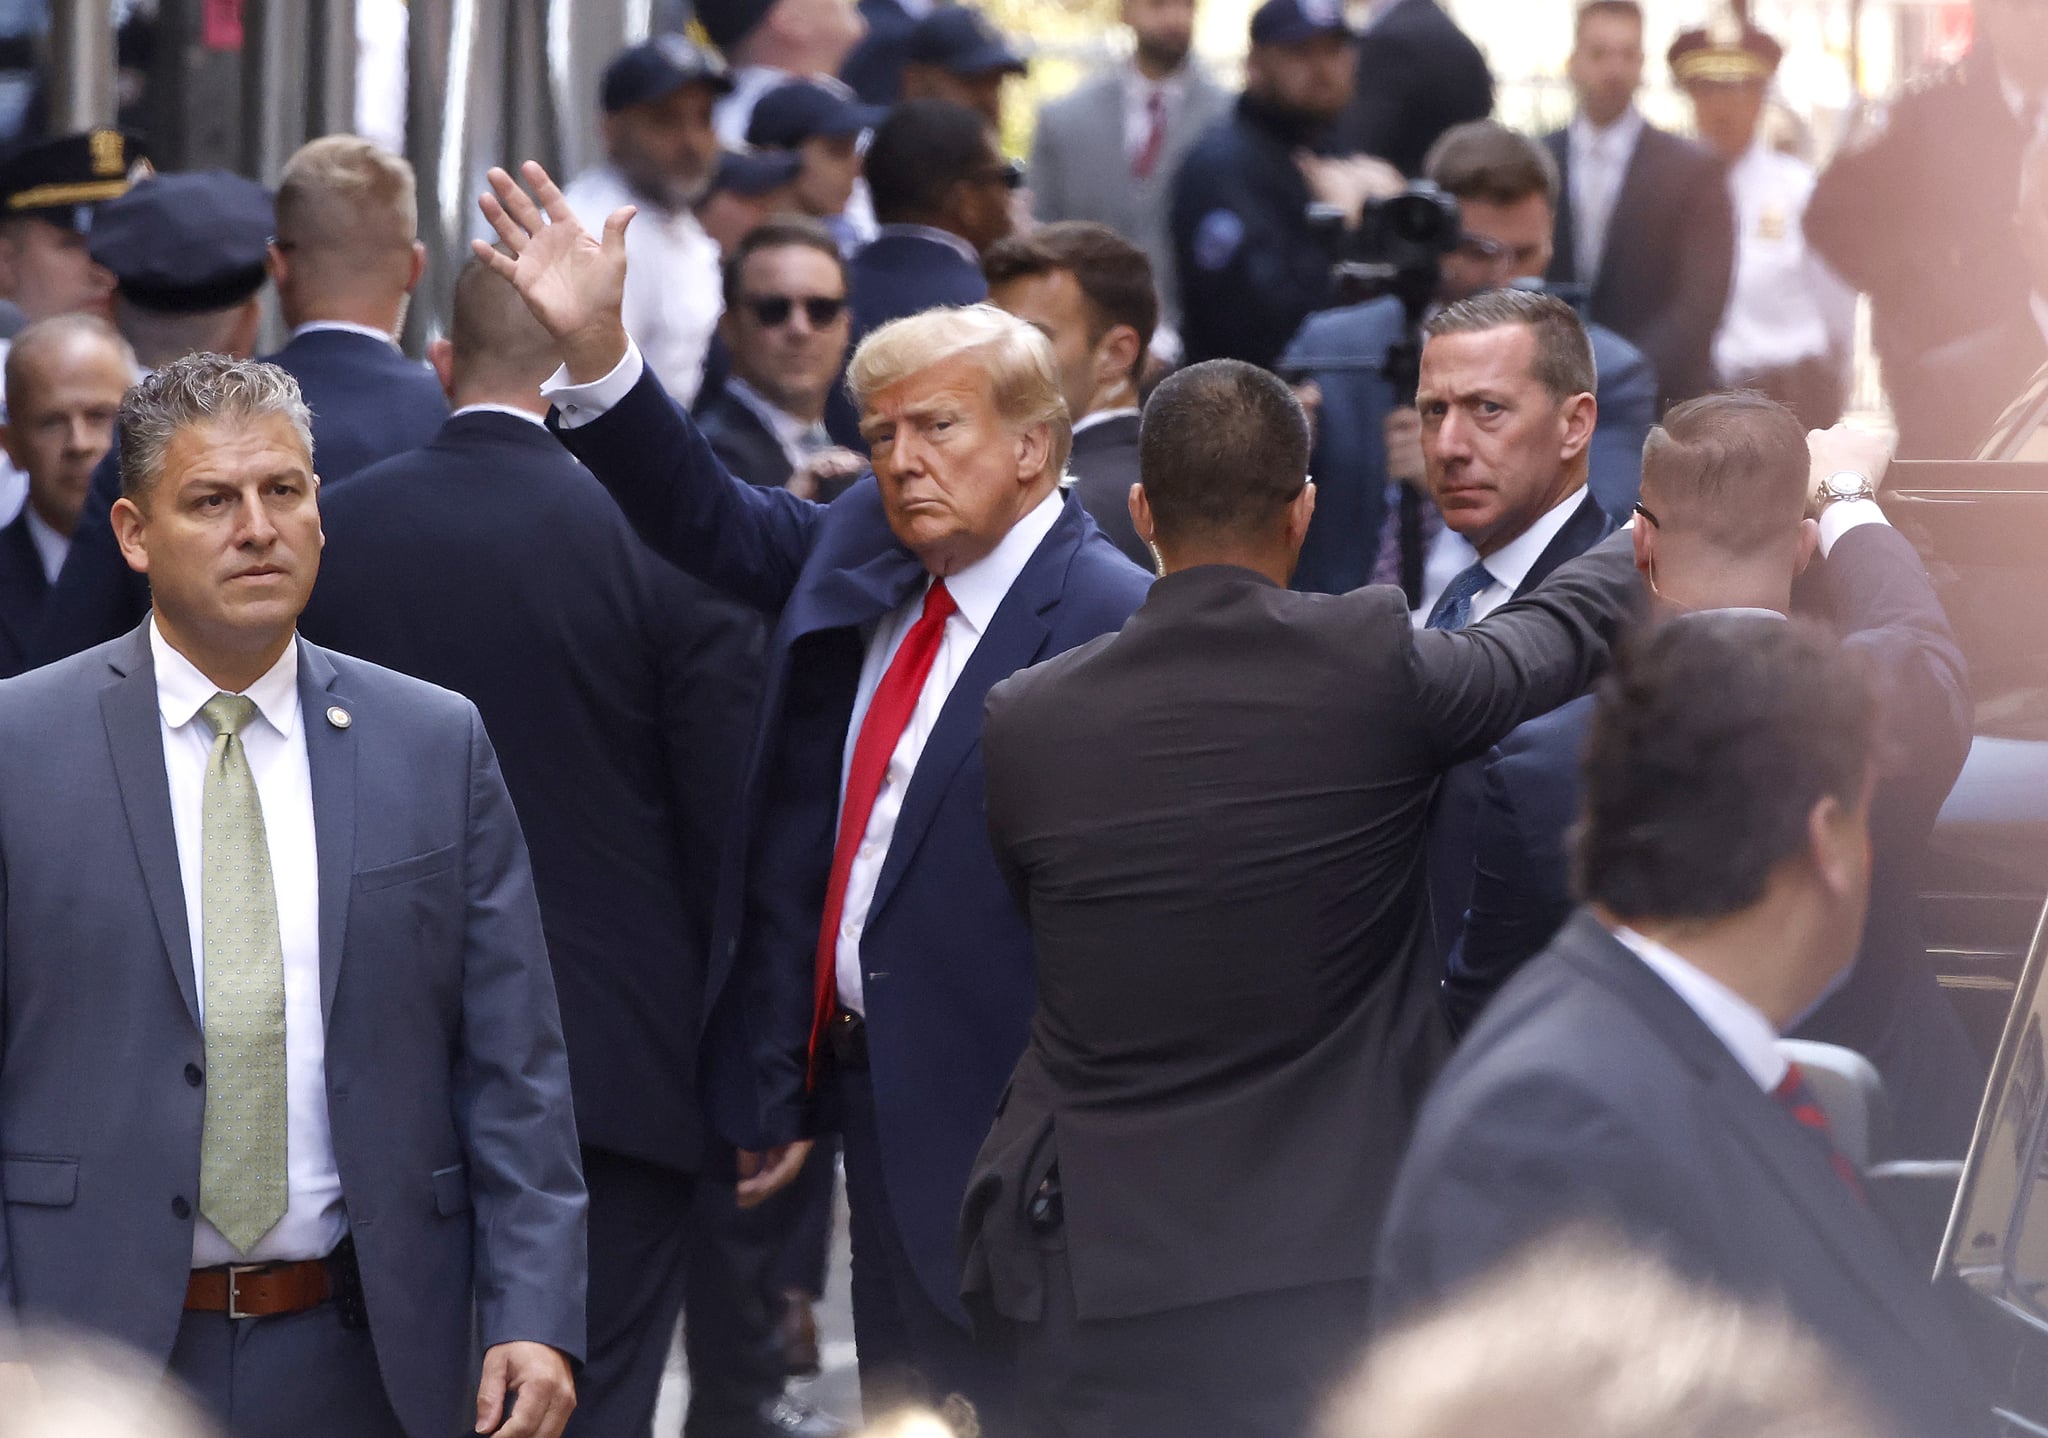 NEW YORK, NEW YORK - APRIL 04: Former U.S. President Donald Trump waves as he arrives at the Manhattan Criminal Court on April 04, 2023 in New York, New York.  Trump will be arraigned during his first court appearance today following an indictment by a grand jury that heard evidence about money paid to adult film star Stormy Daniels before the 2016 presidential election. With the indictment, Trump becomes the first former U.S. president in history to be charged with a criminal offence. (Photo by Kena Betancur/Getty Images)